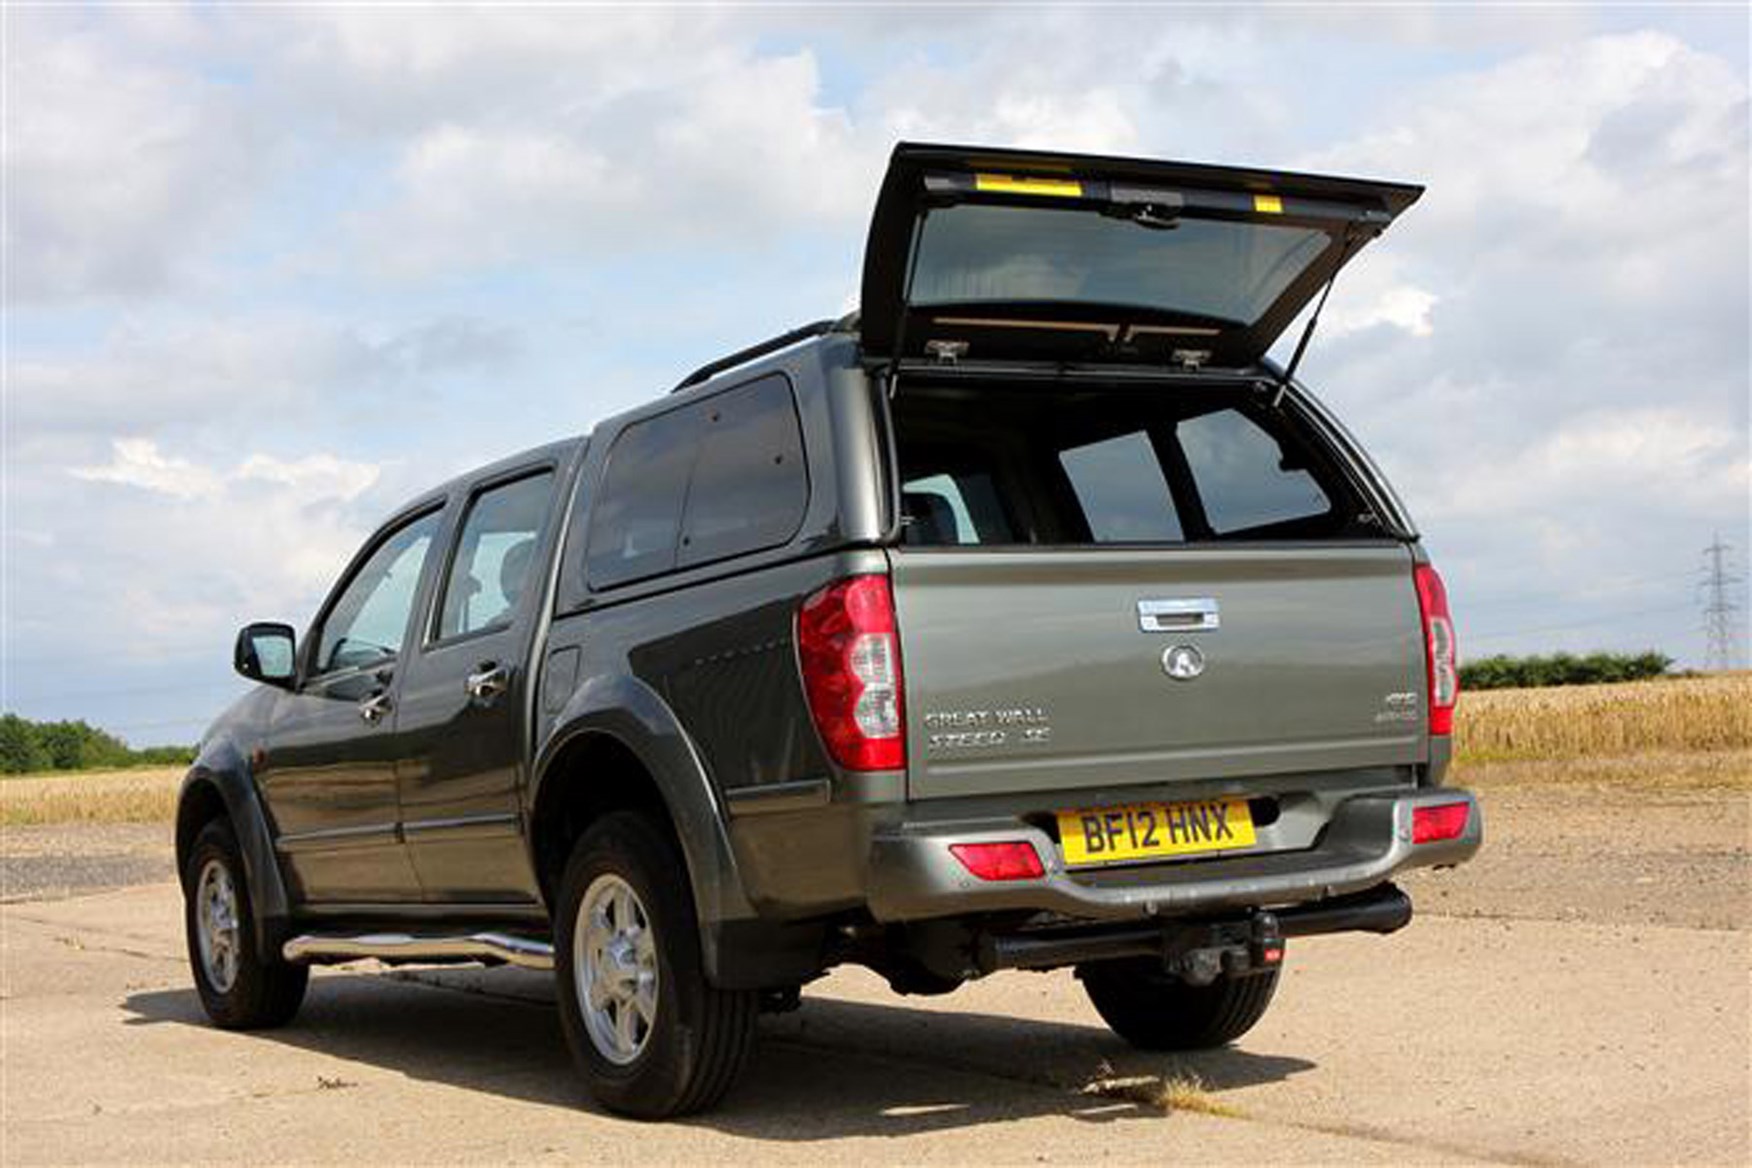 Great Wall Steed full review on Parkers Vans - load area access